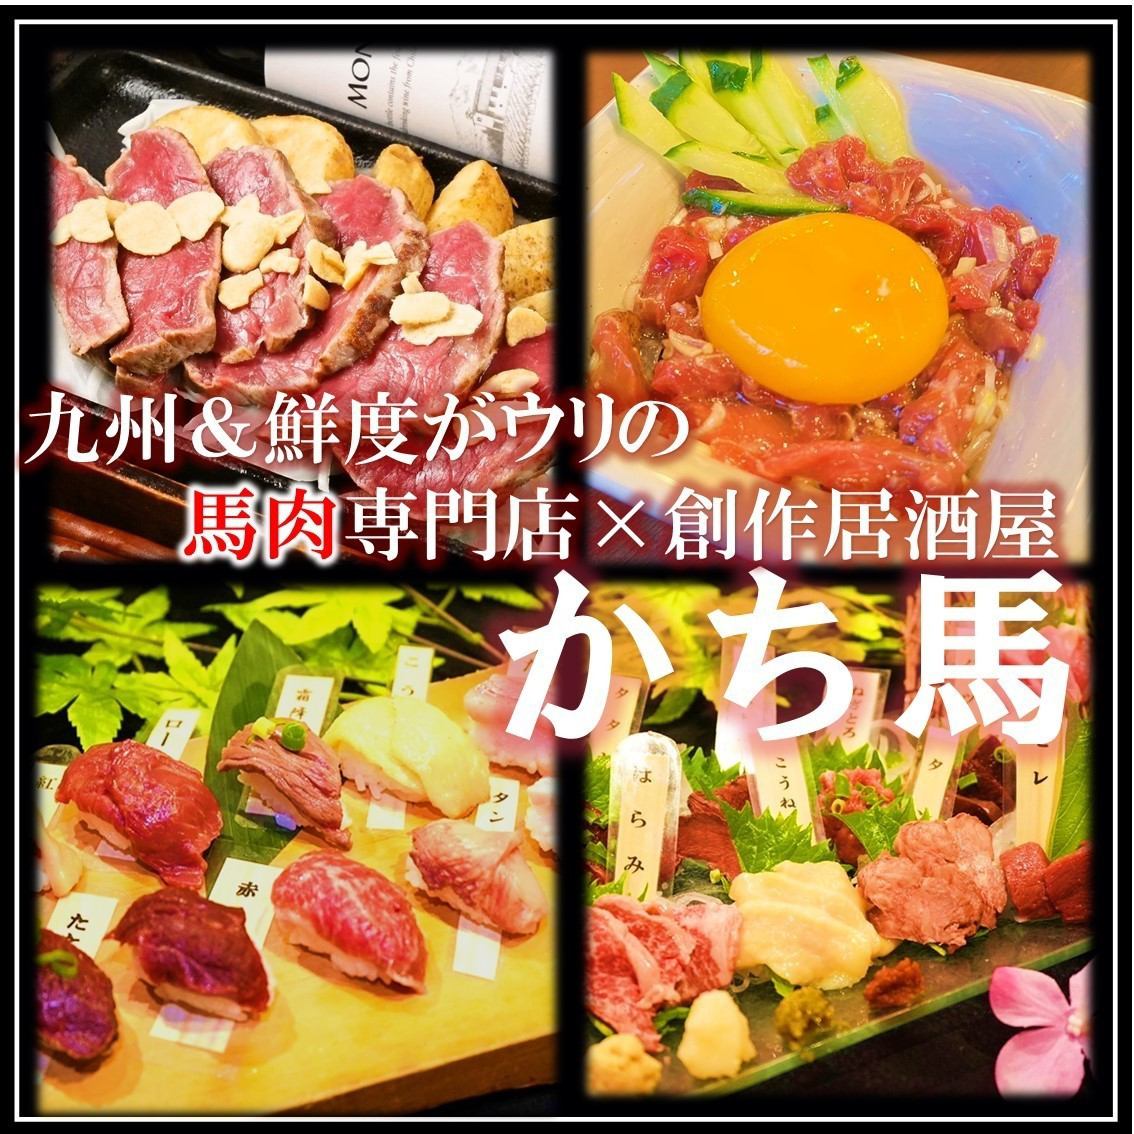 [Horse meat specialty store] A hideaway where you can forget the hustle and bustle of Kinshicho, enjoy specialty sake and carefully selected horse meat